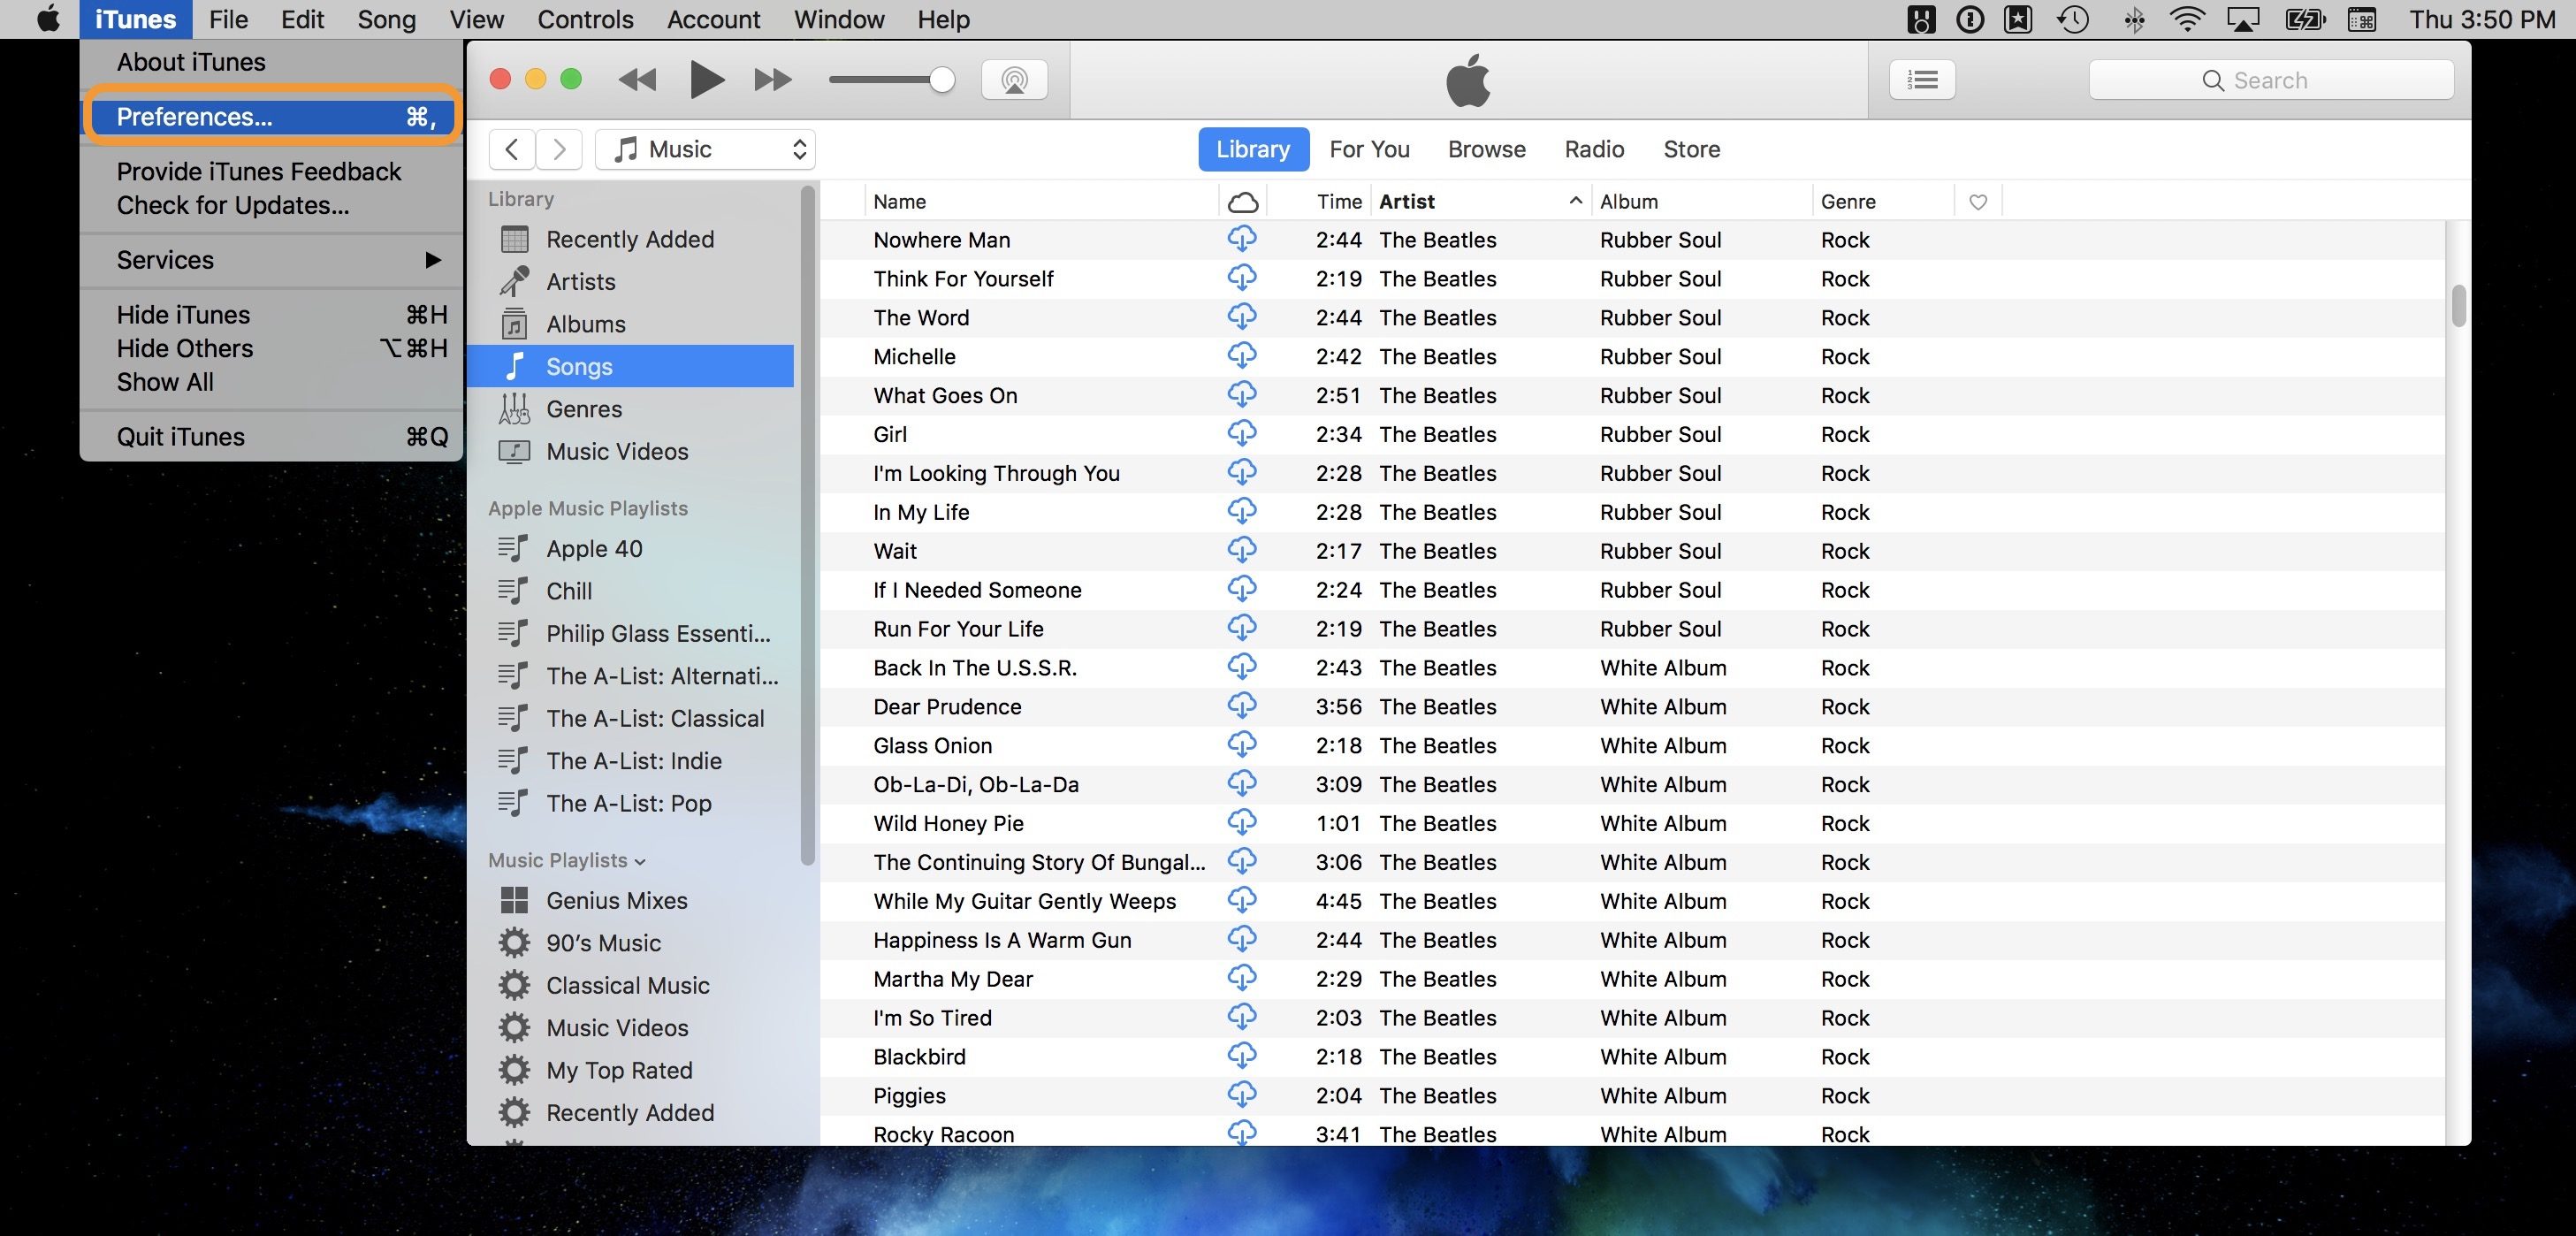 How Do I Access Icloud Music Library On Mac